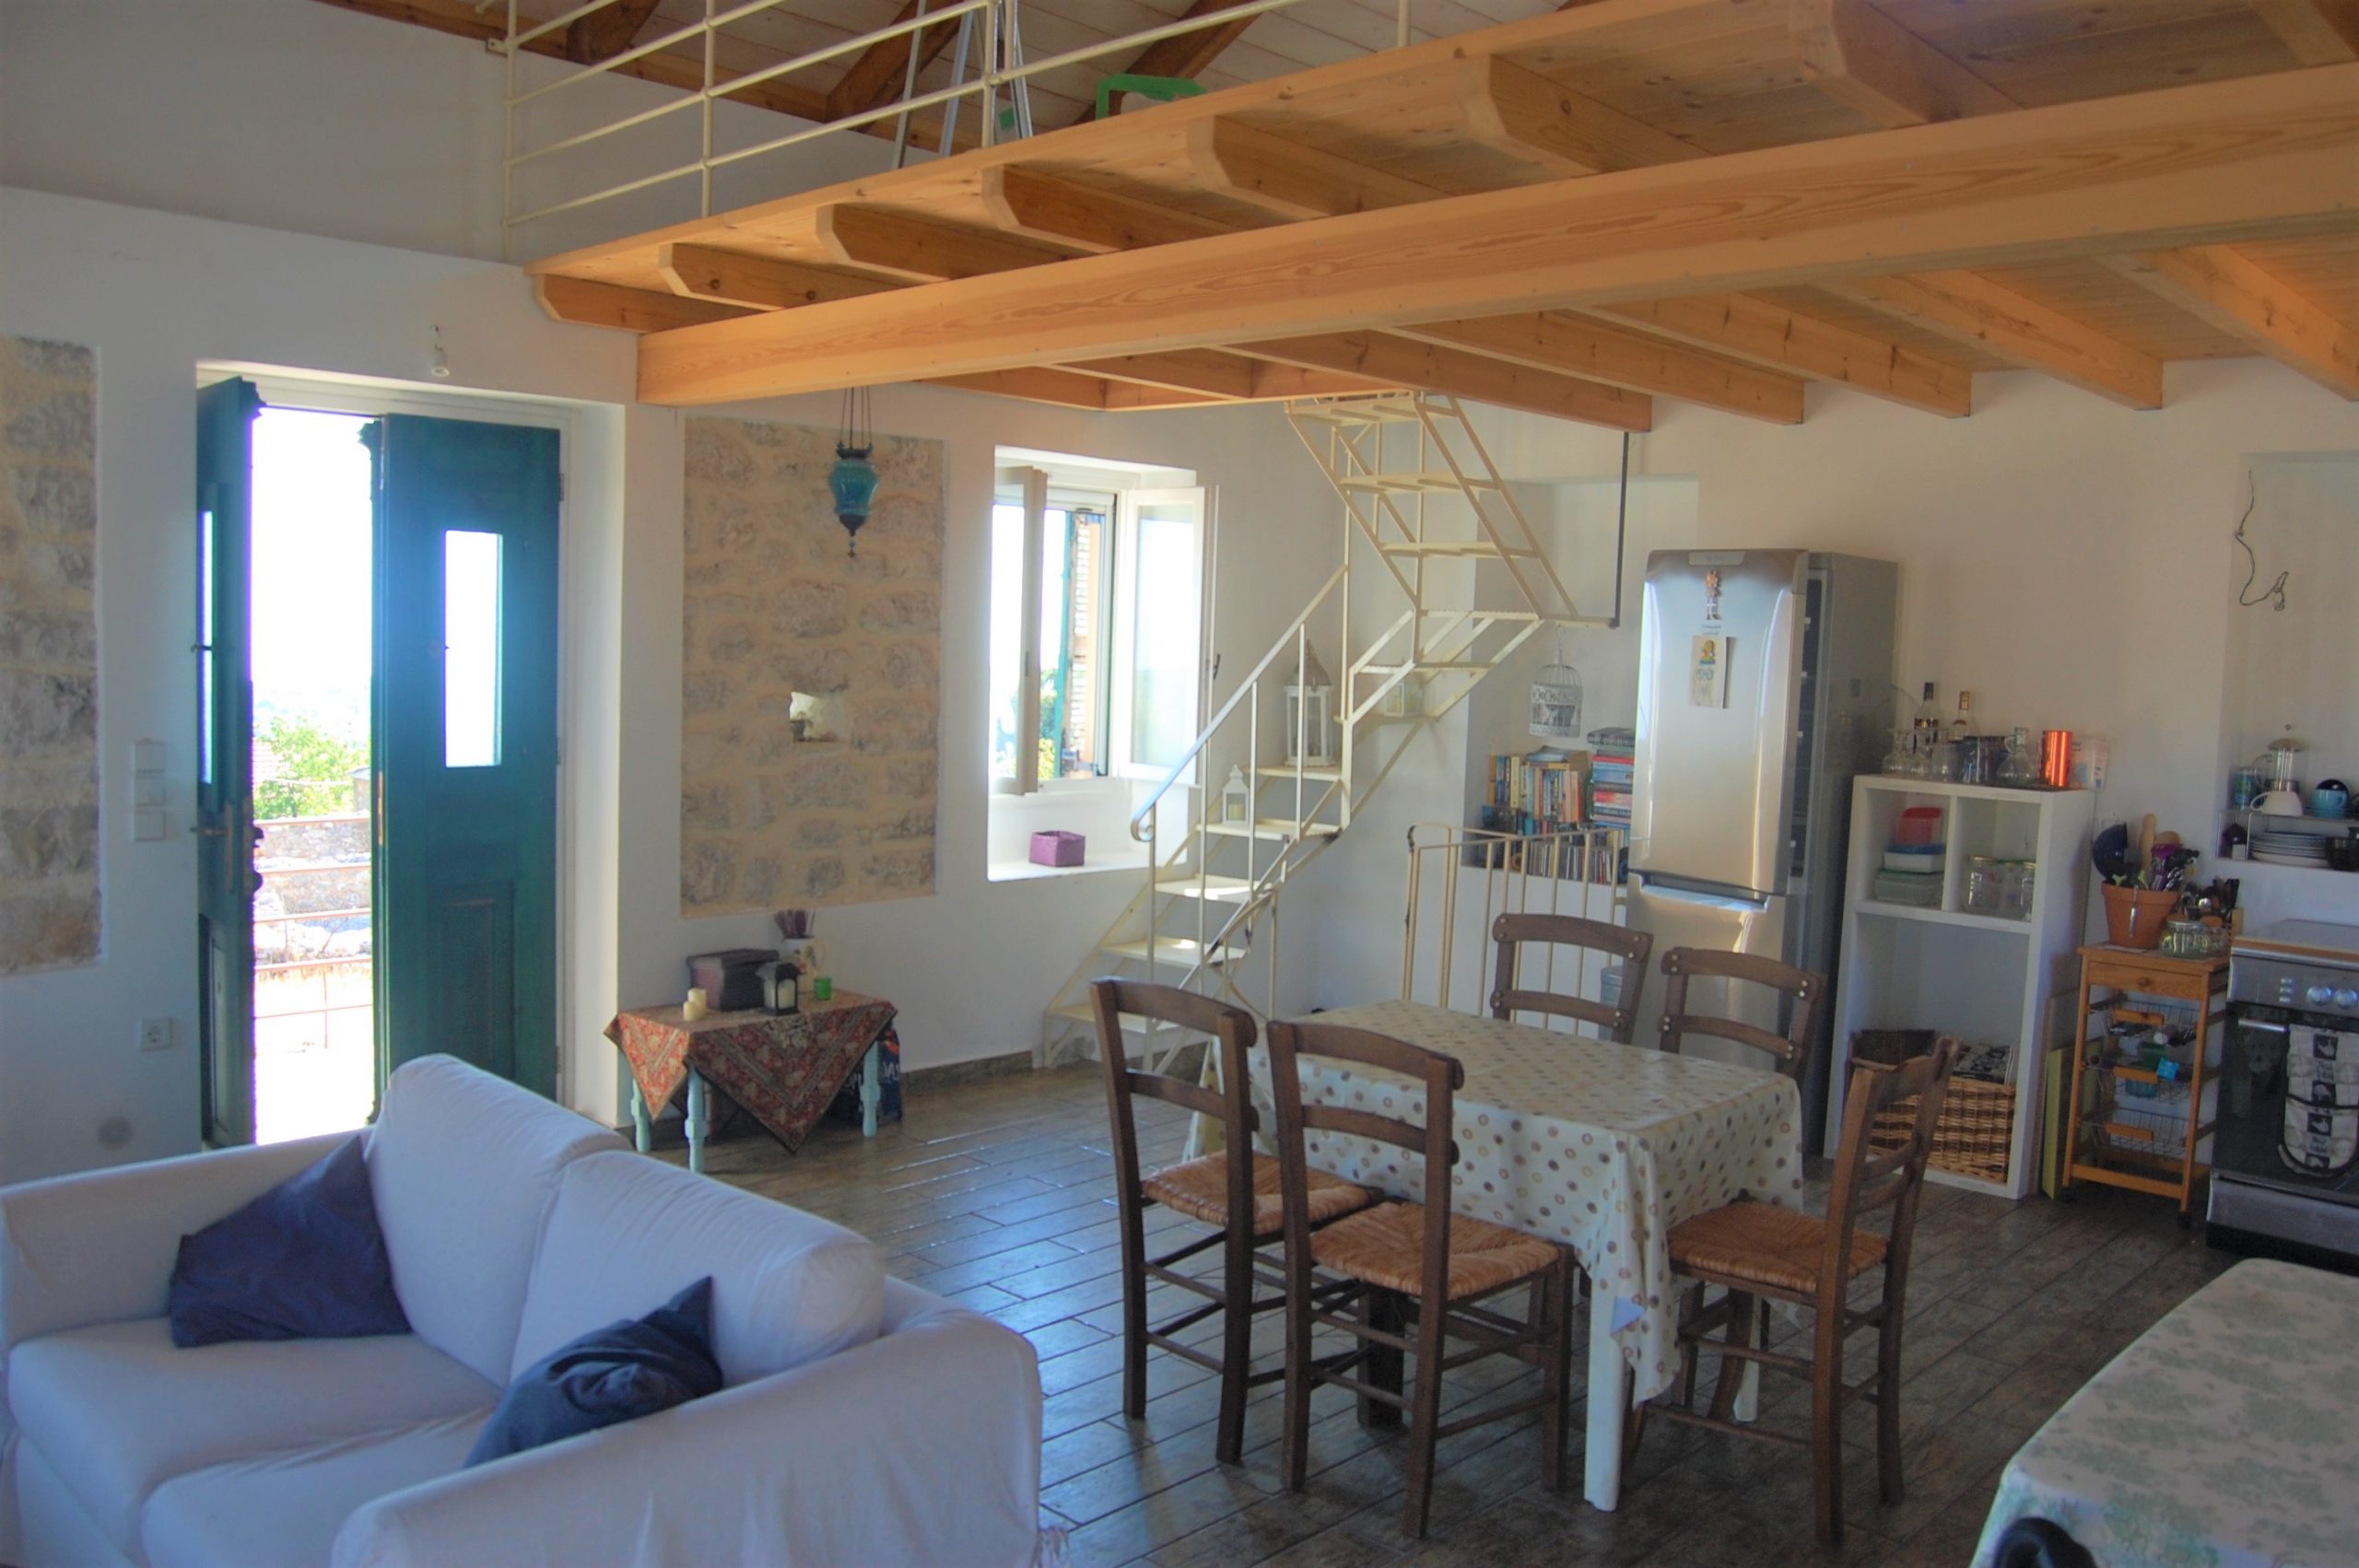 Living room area of house for sale Ithaca Greece, Anoghi